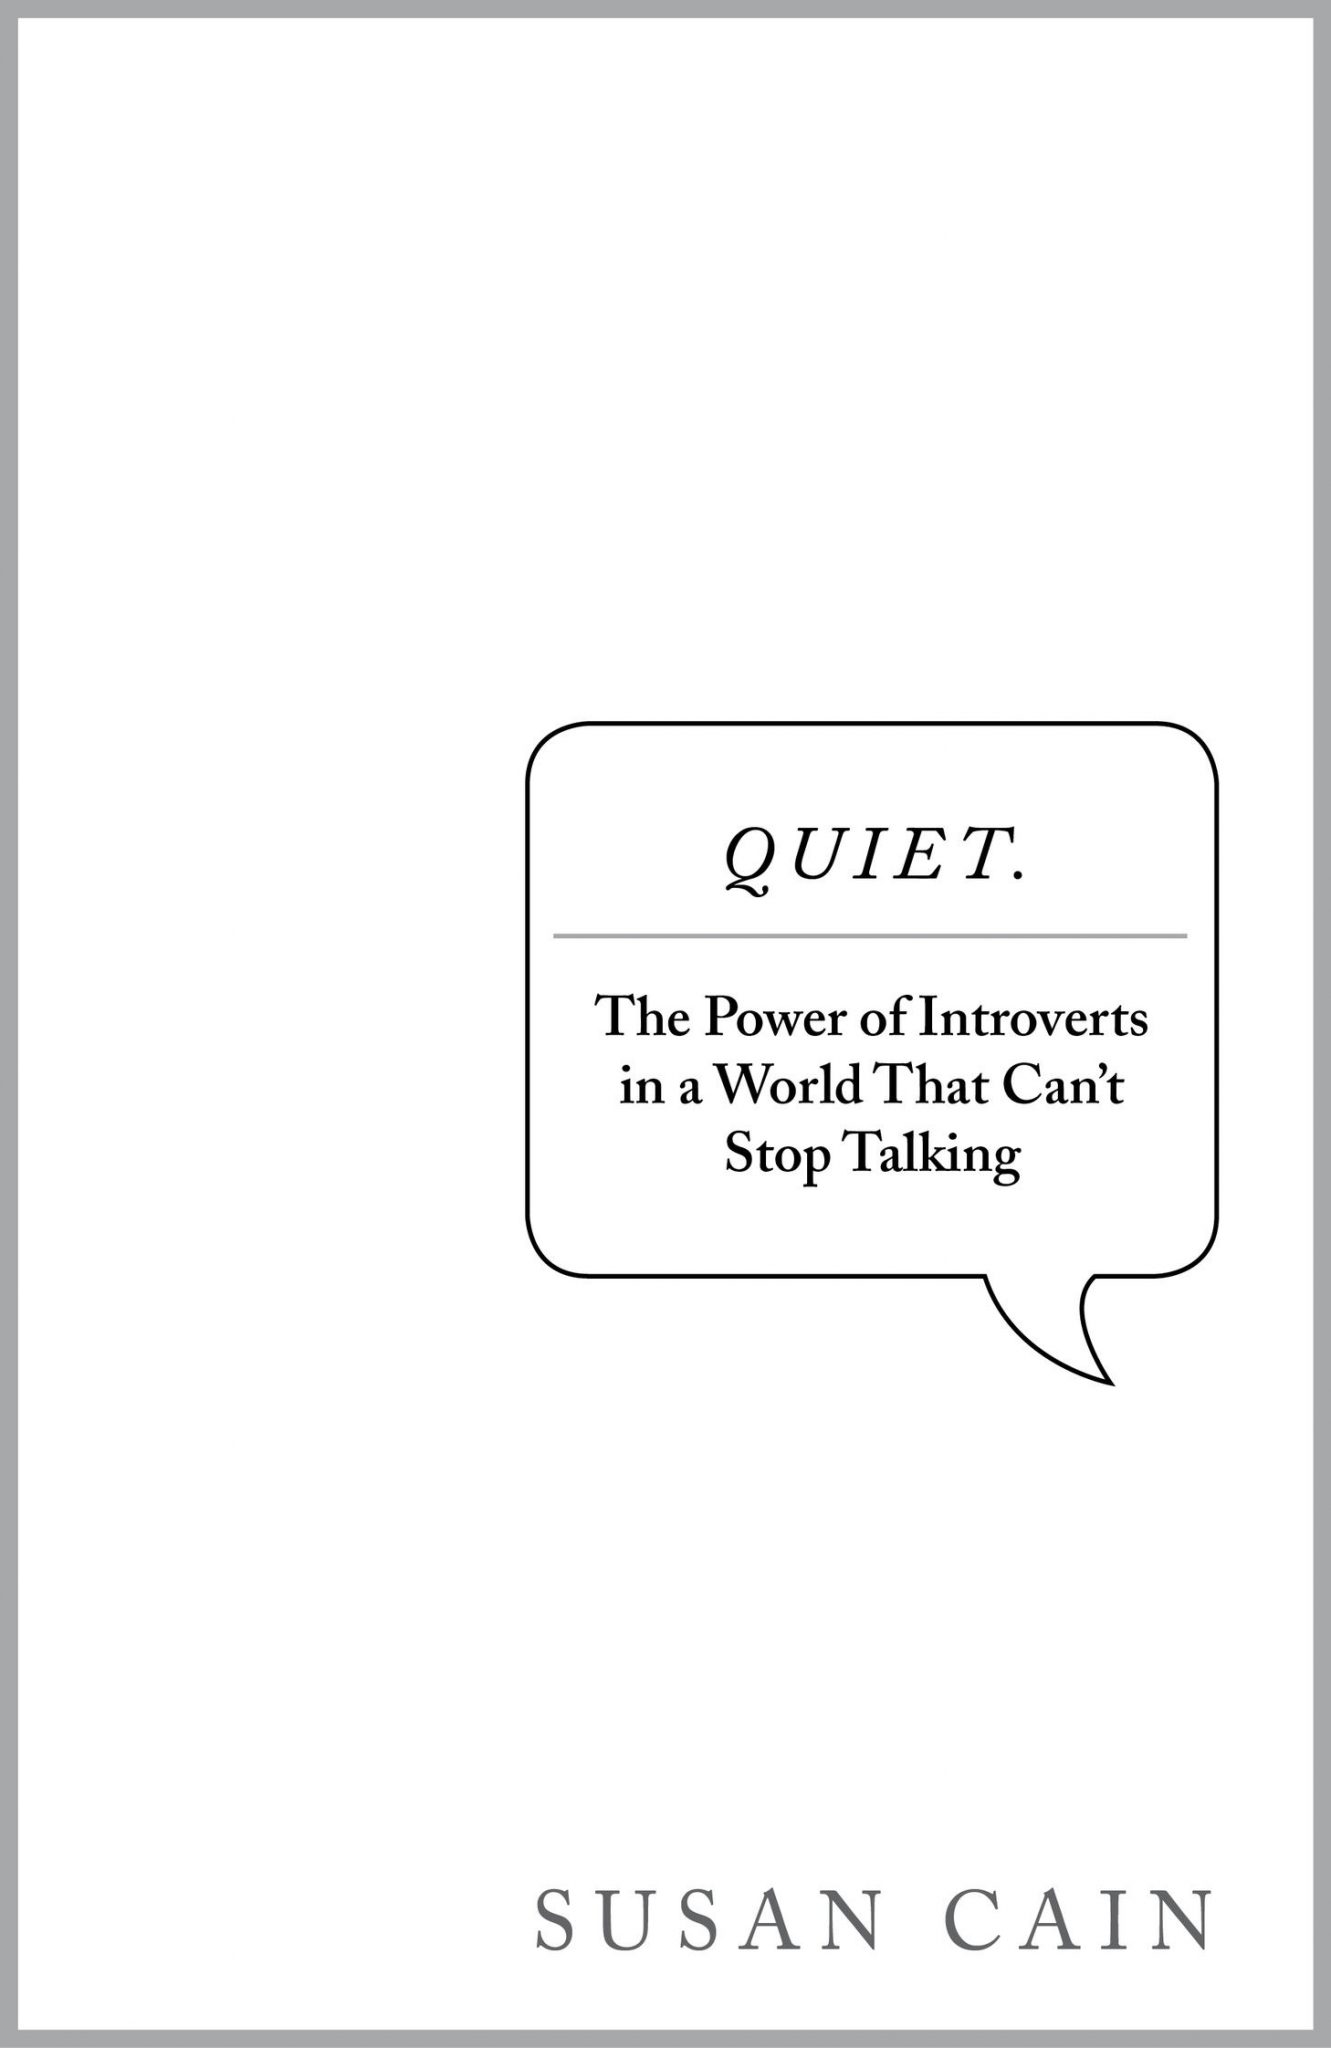 Quiet: Power of Introverts book cover